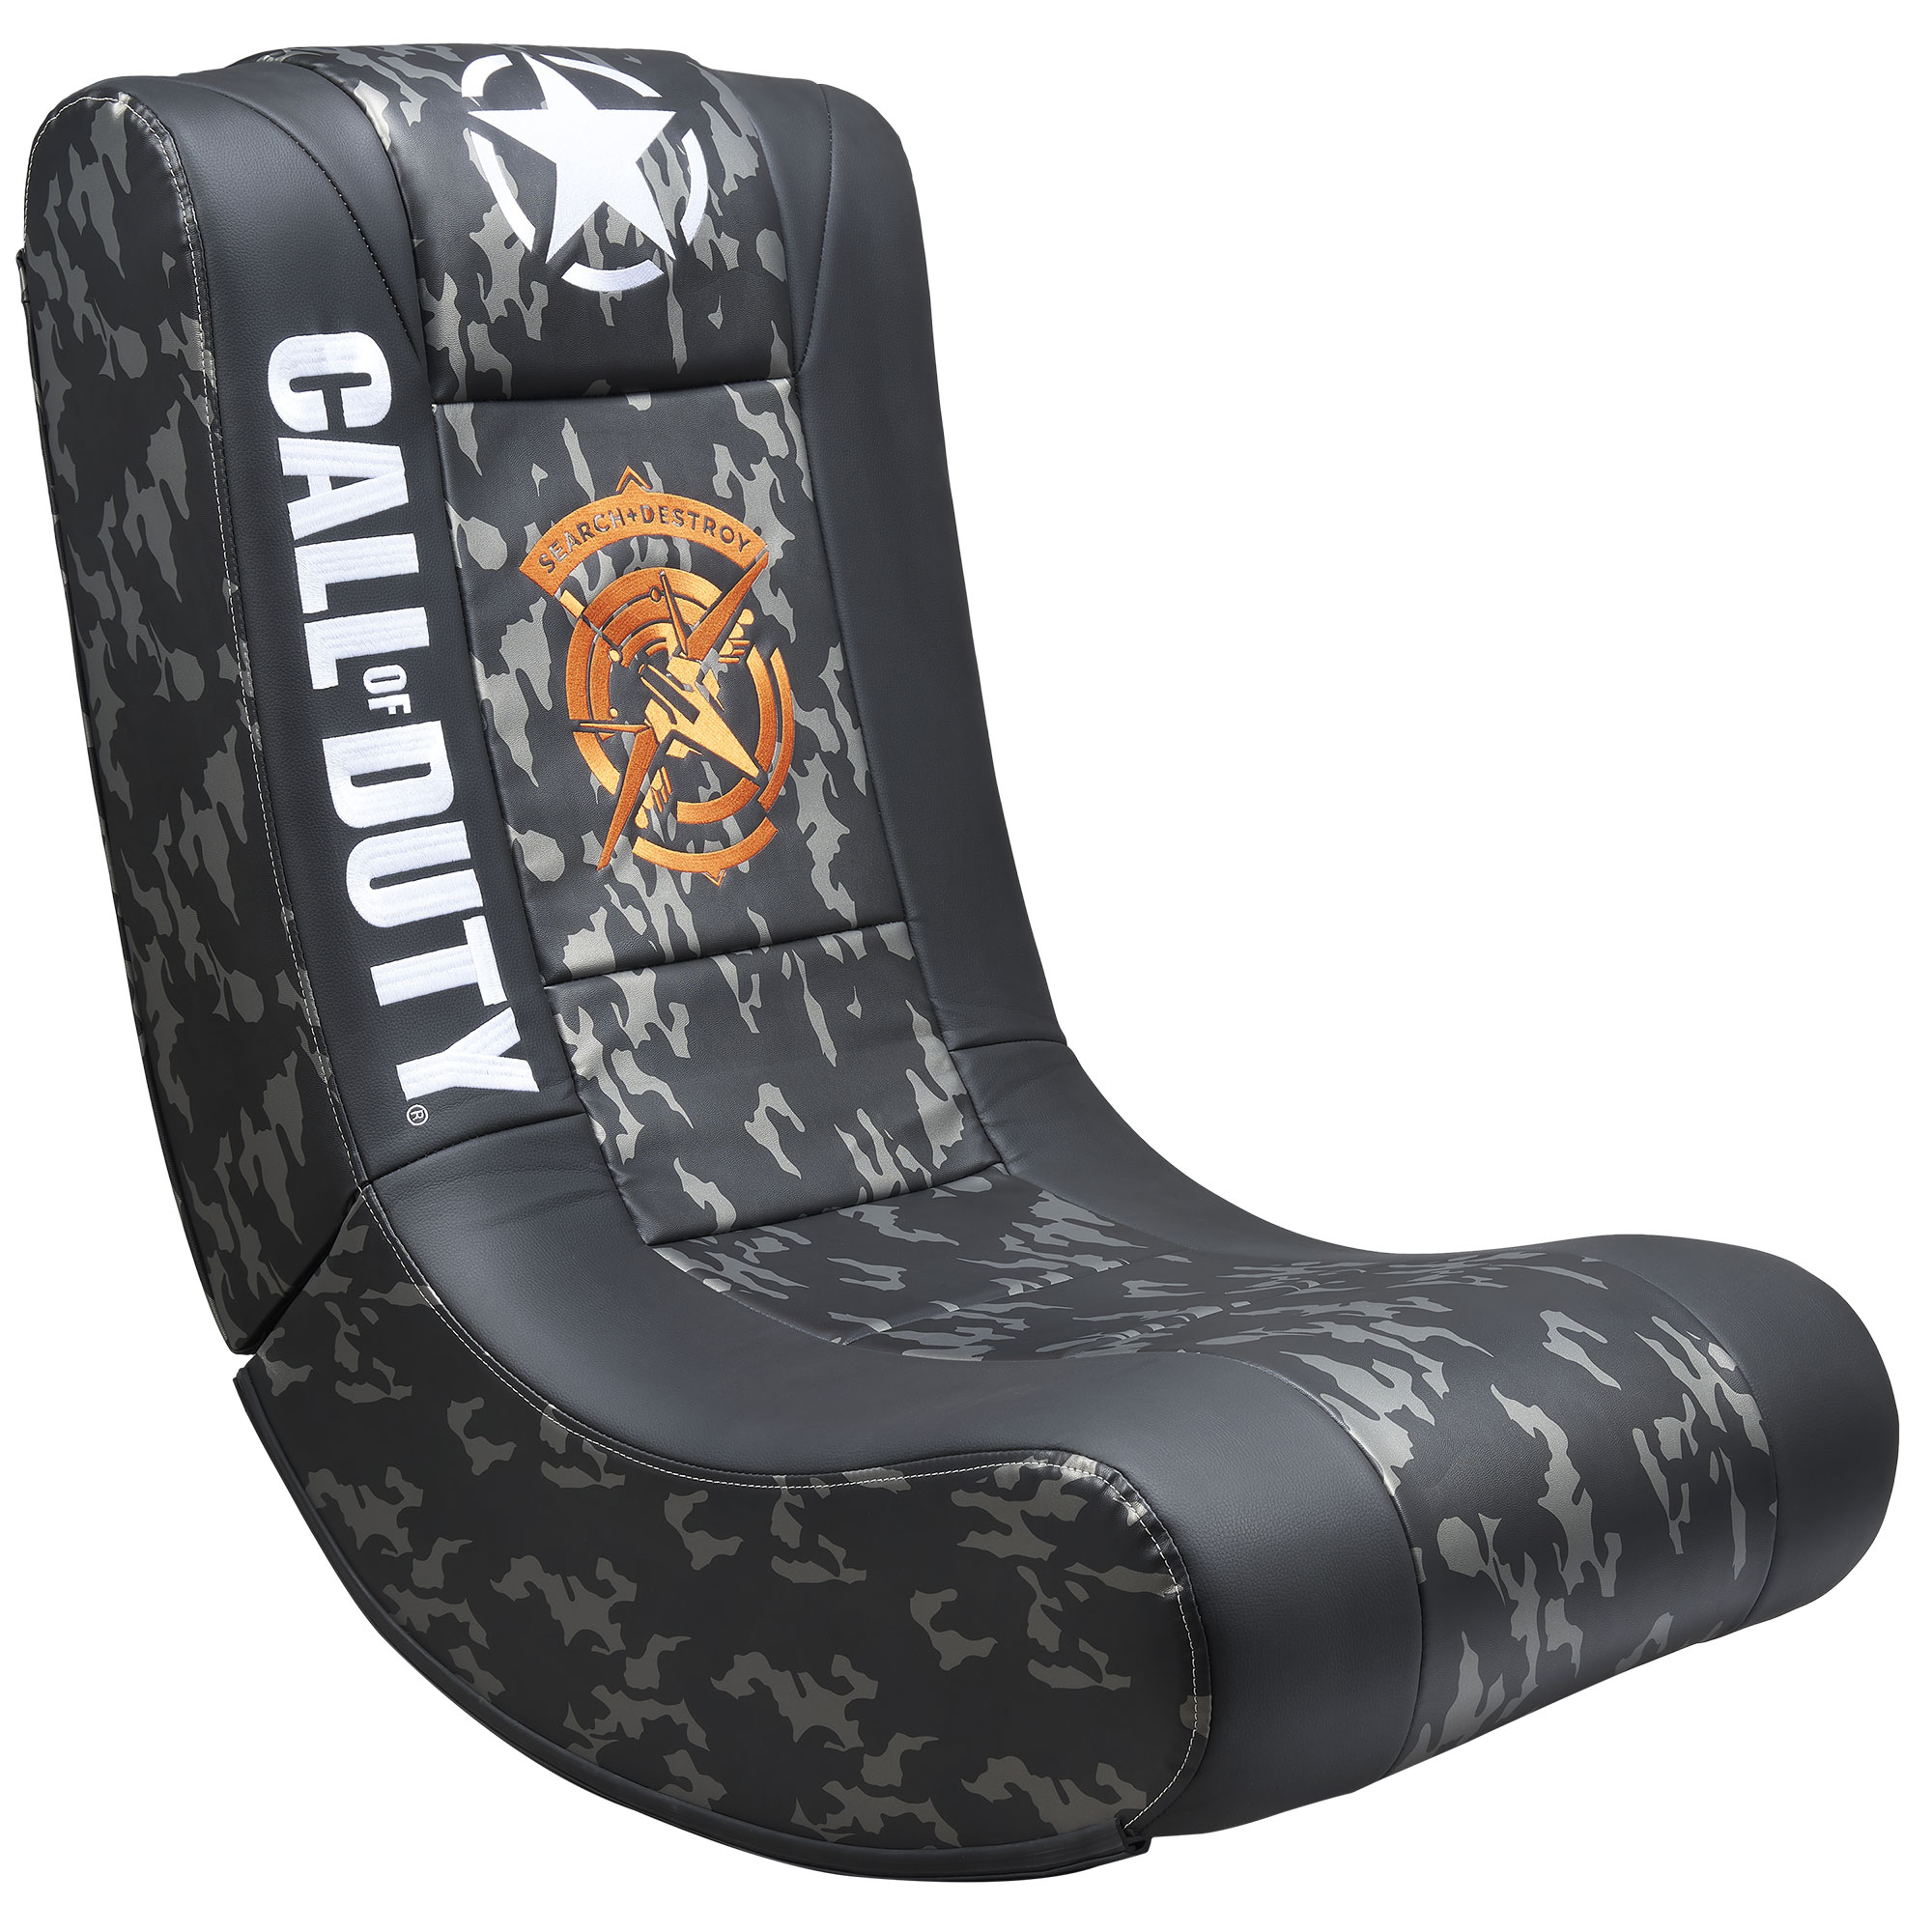 Silla Gamer Rock'n Seat Call Of Duty | Subsonic